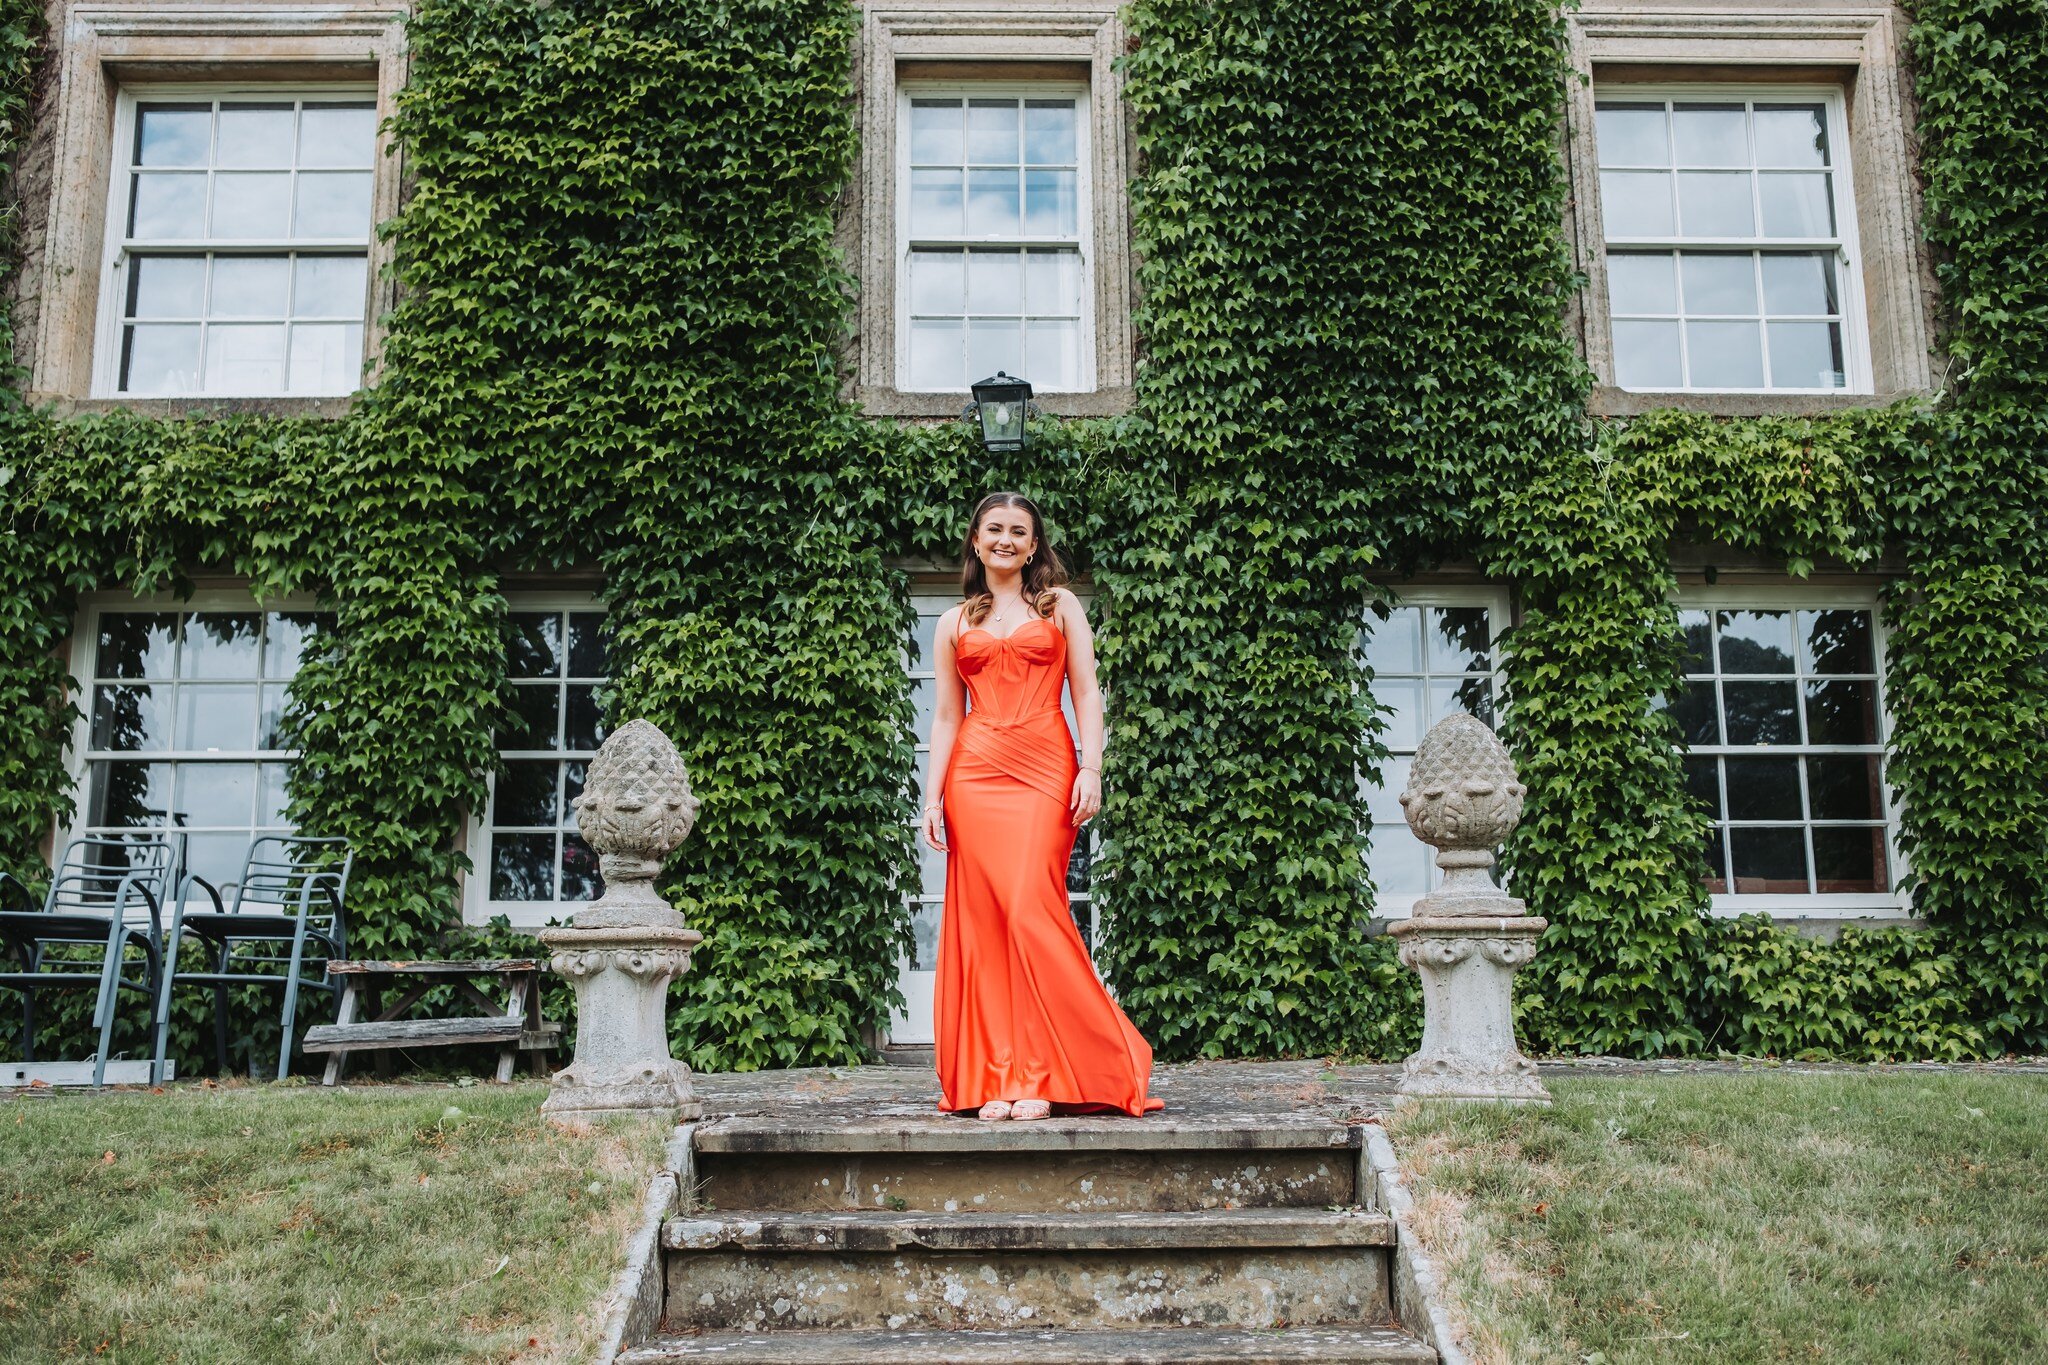 Just look at that dress! 💃🏻

I had the pleasure of photographing Olivia and her family just before her prom recently. 🥂

I was welcomed into their beautiful home at Tytton Hall. The grounds were just stunning and supplied me with amazing backdrops